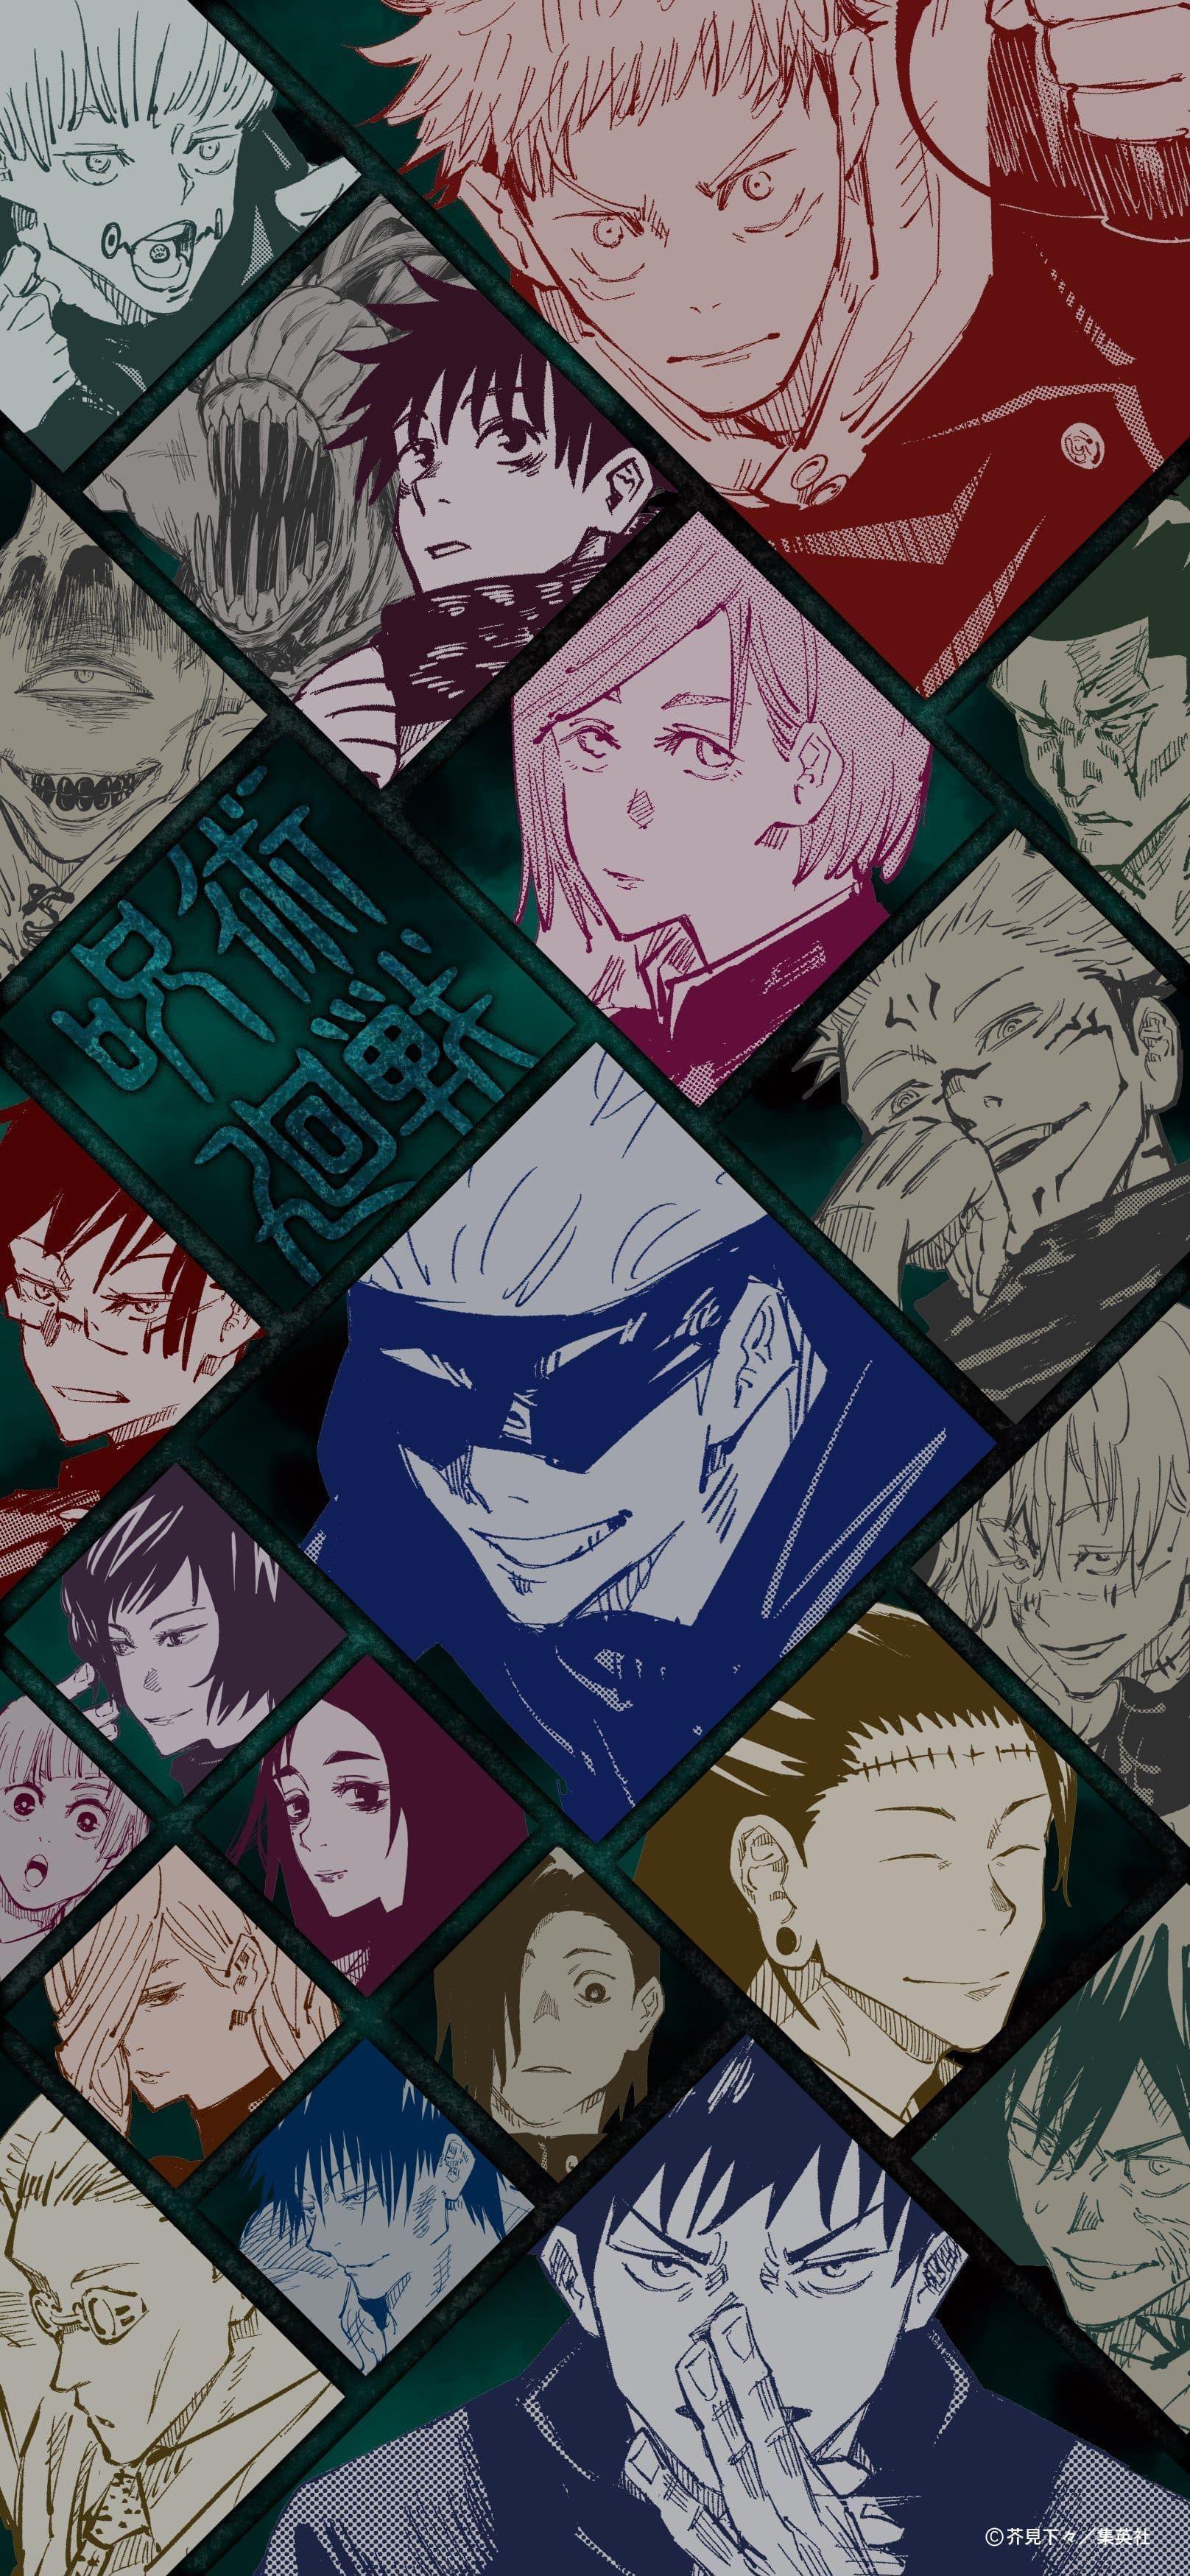 What jujutsu kaisen related thing do you have as wallpaper r